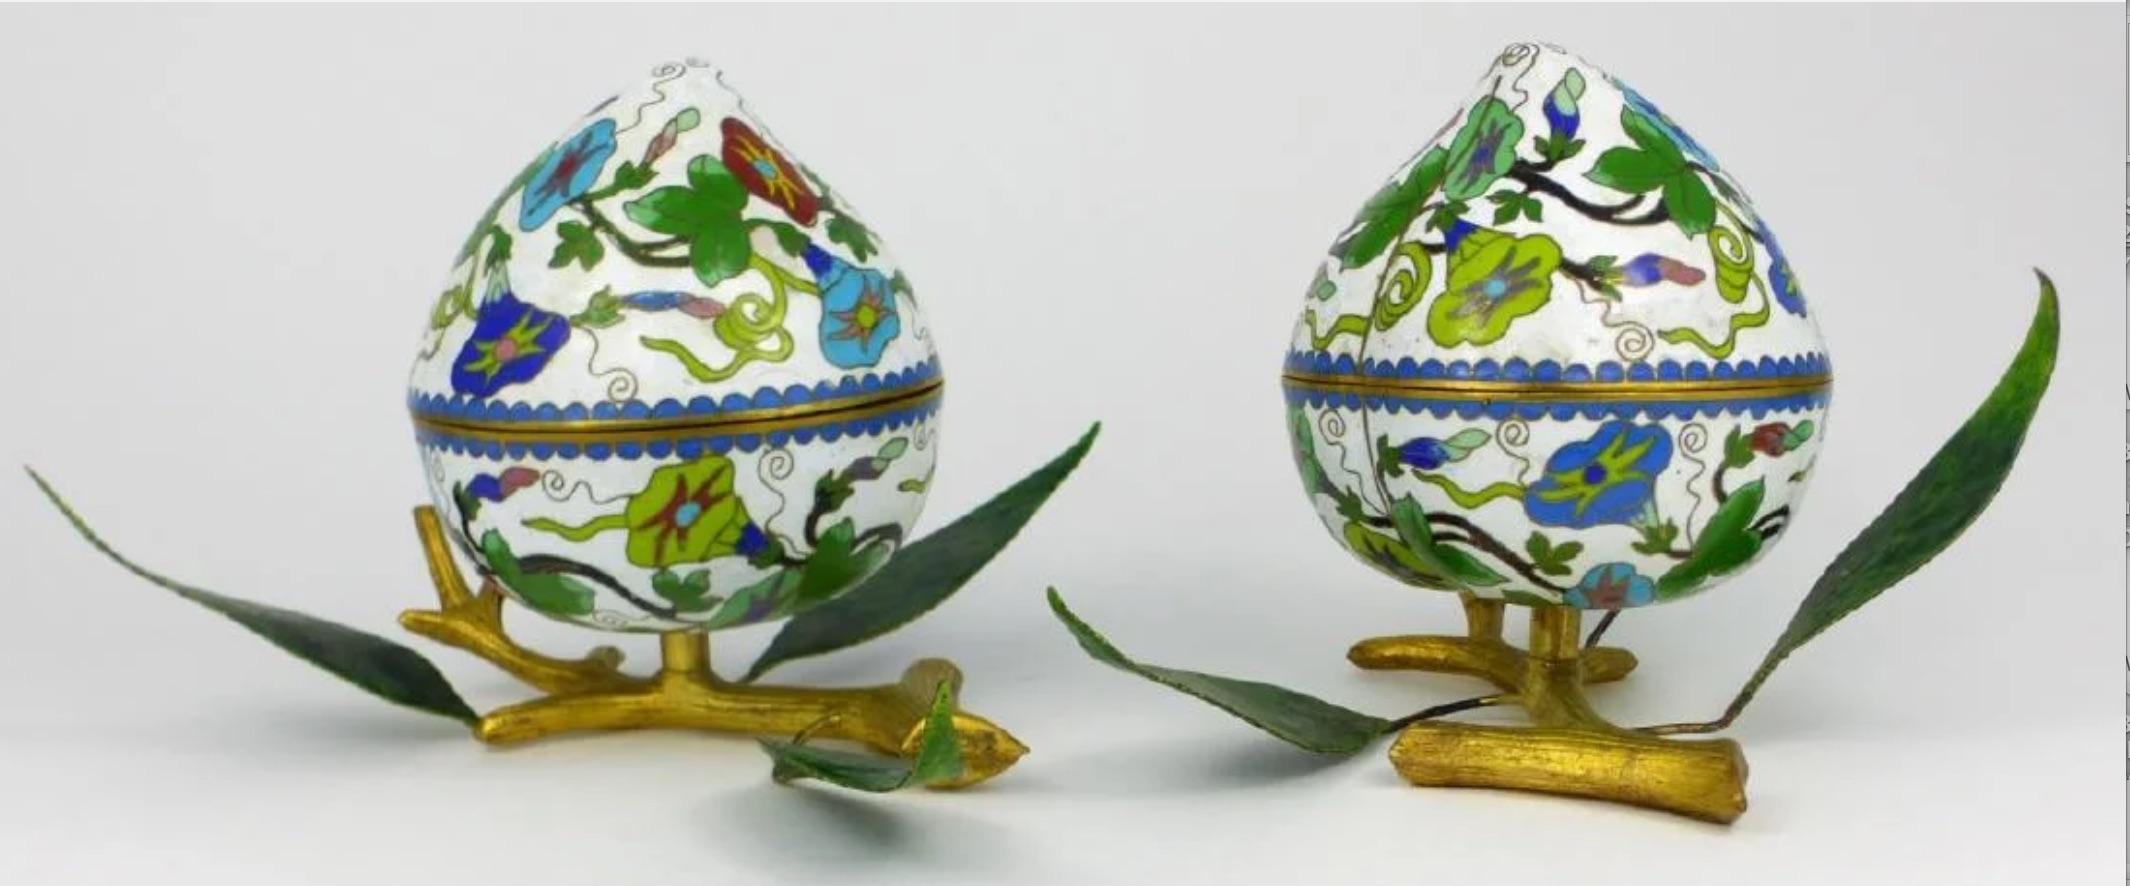 20th Century Pair of Chinese Cloisonné Enamel Peach-Form Box and Cover, circa 1910-1940 For Sale